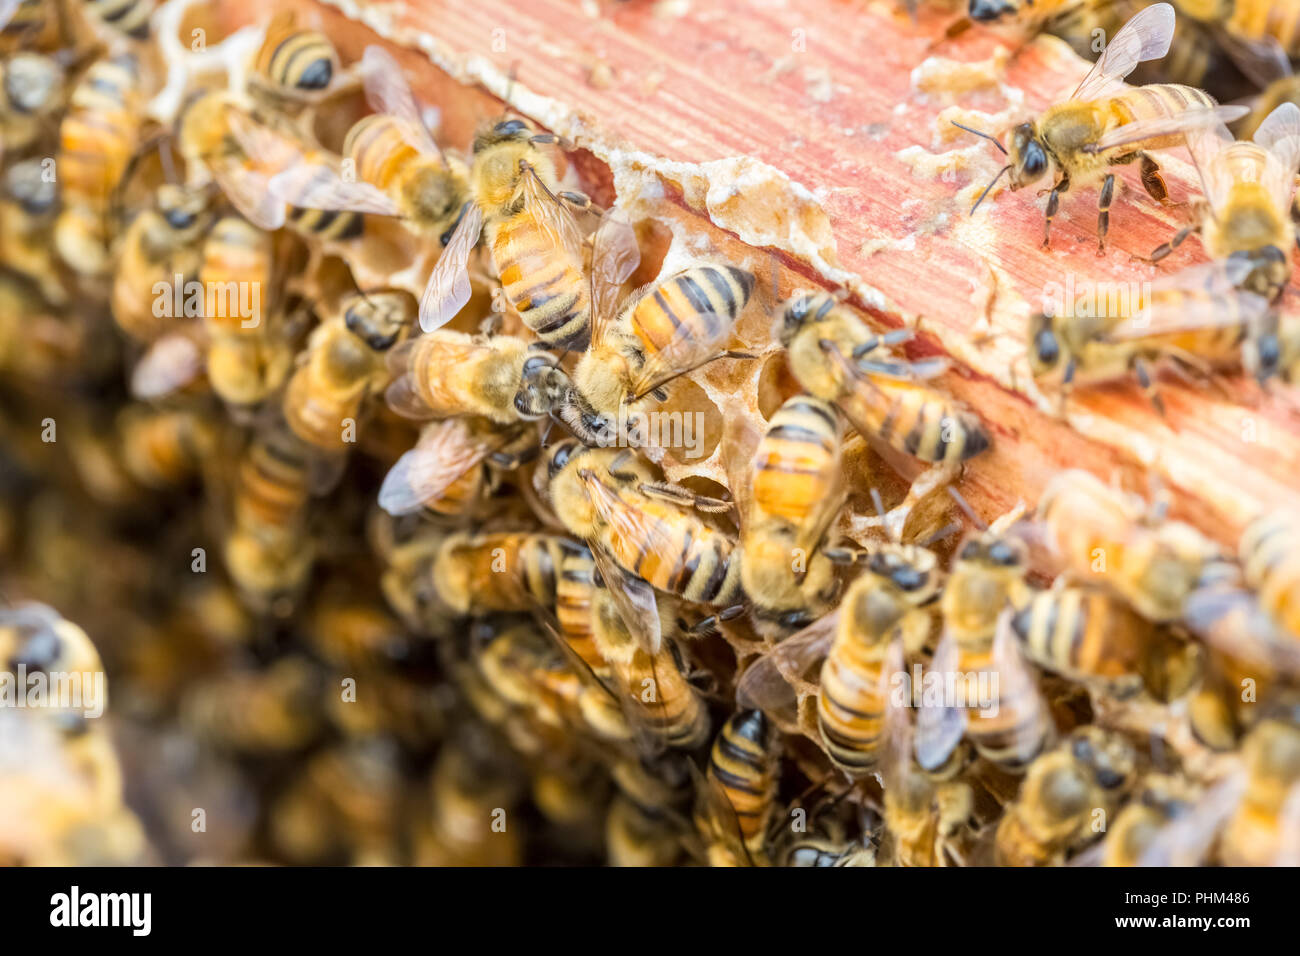 worker bees on beehive Stock Photo